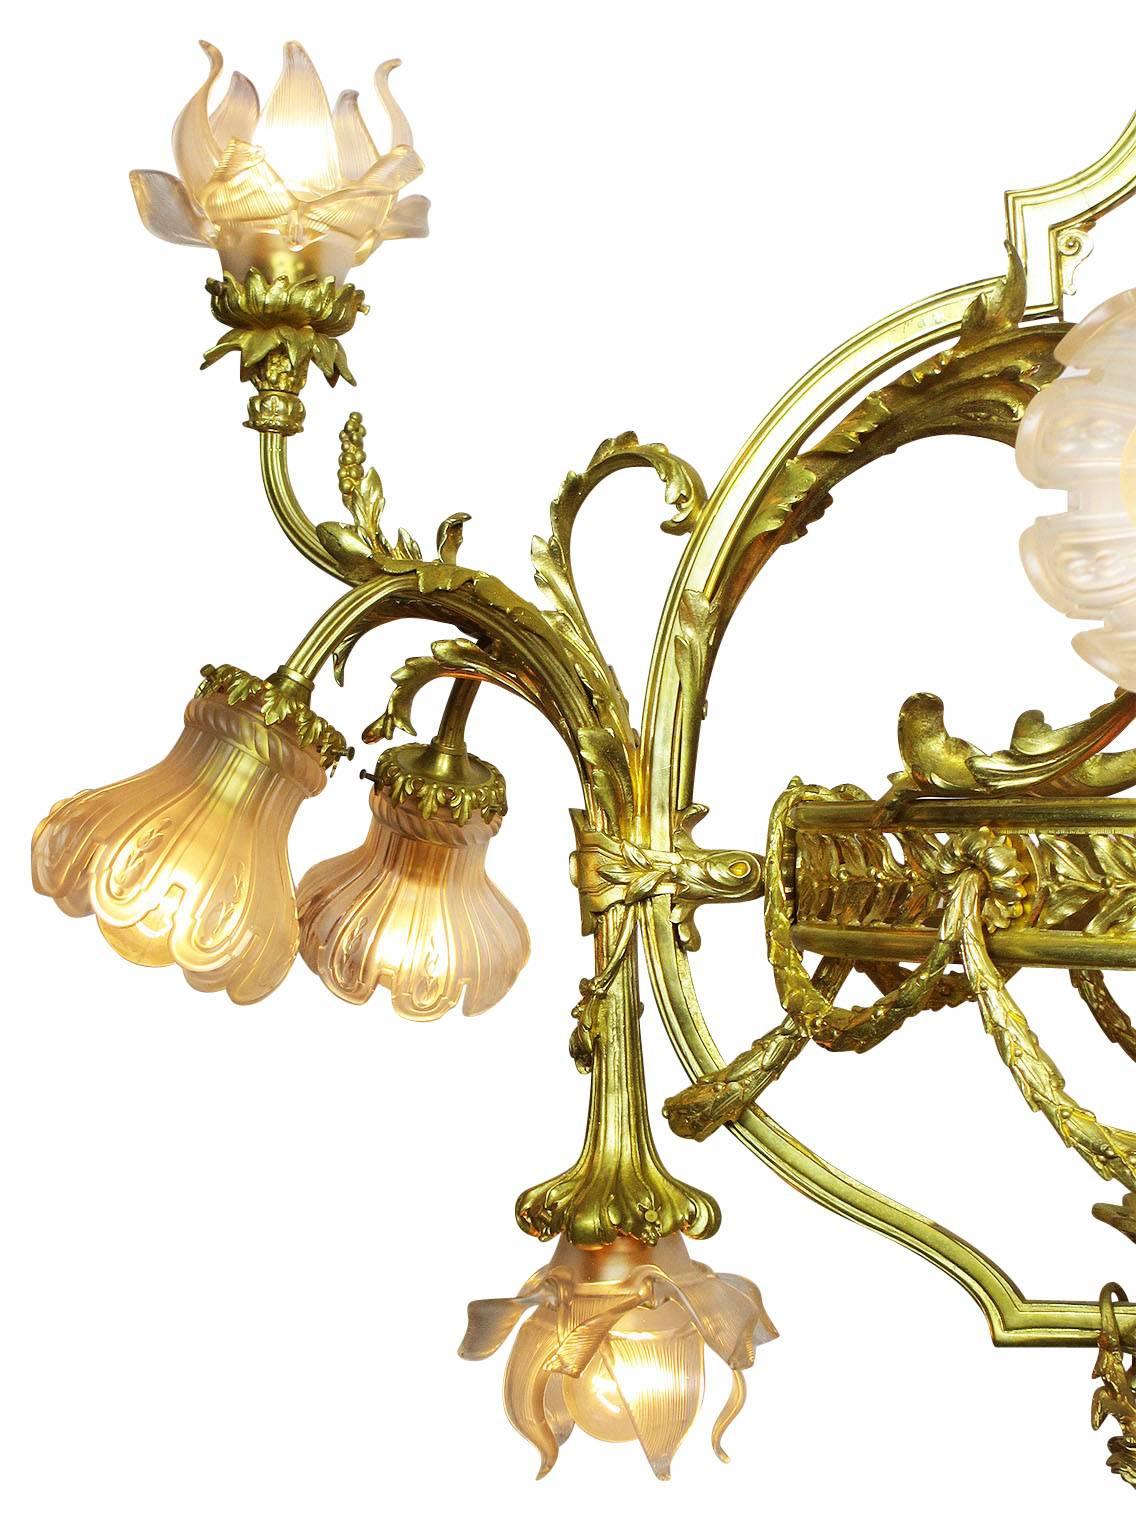 Palatial French 19th/20th Century Louis XIV Style Gilt-Bronze Orante Chandelier  For Sale 1